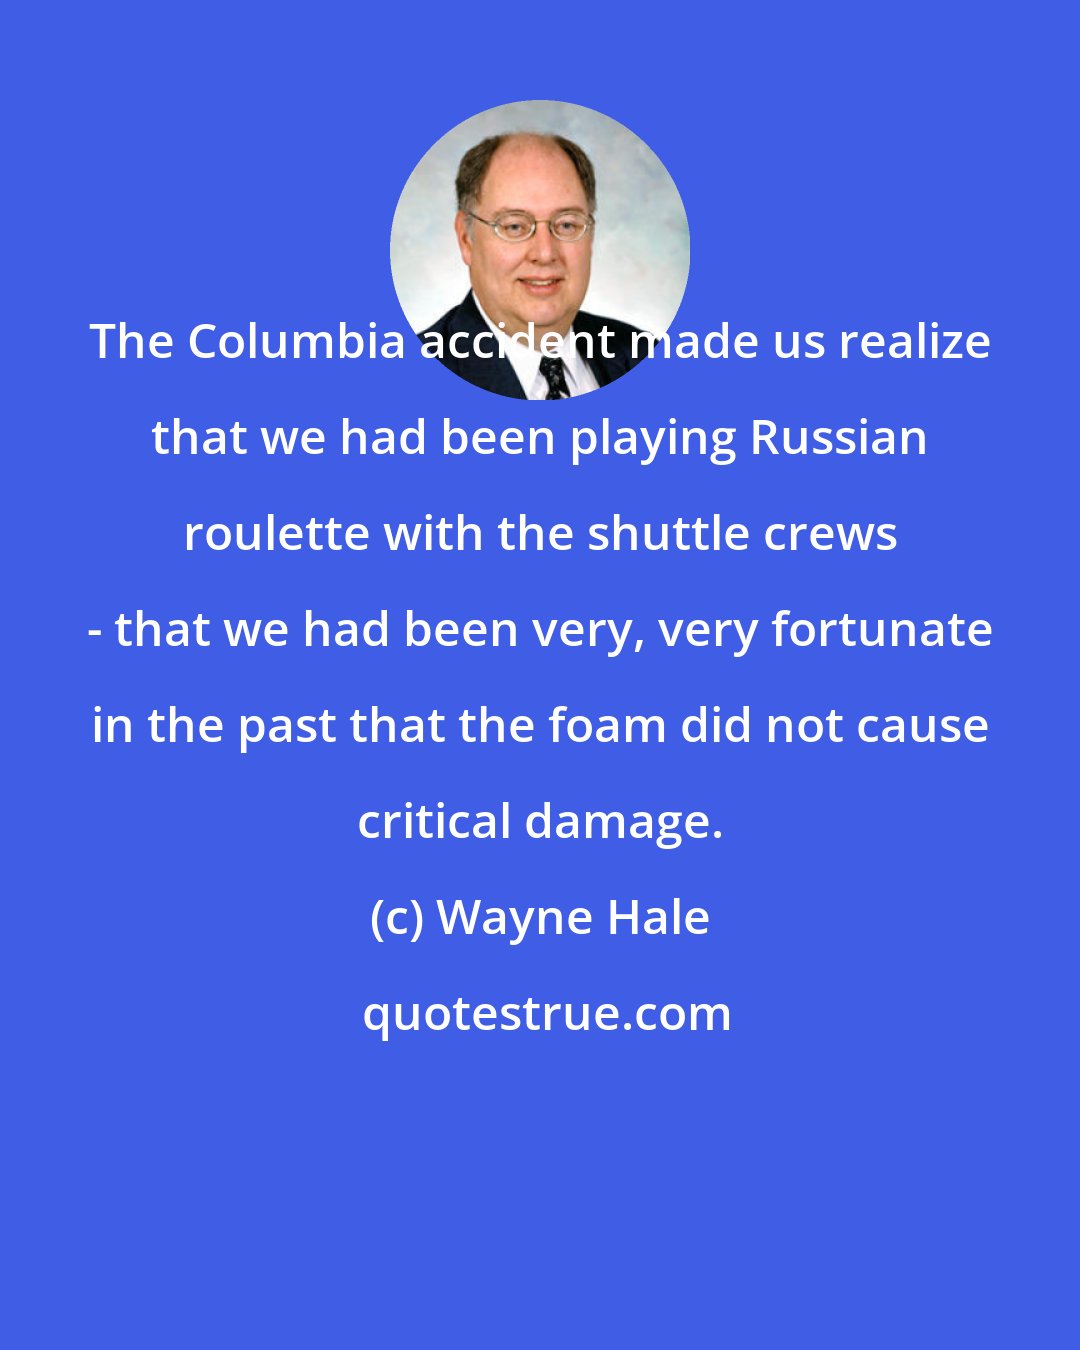 Wayne Hale: The Columbia accident made us realize that we had been playing Russian roulette with the shuttle crews - that we had been very, very fortunate in the past that the foam did not cause critical damage.